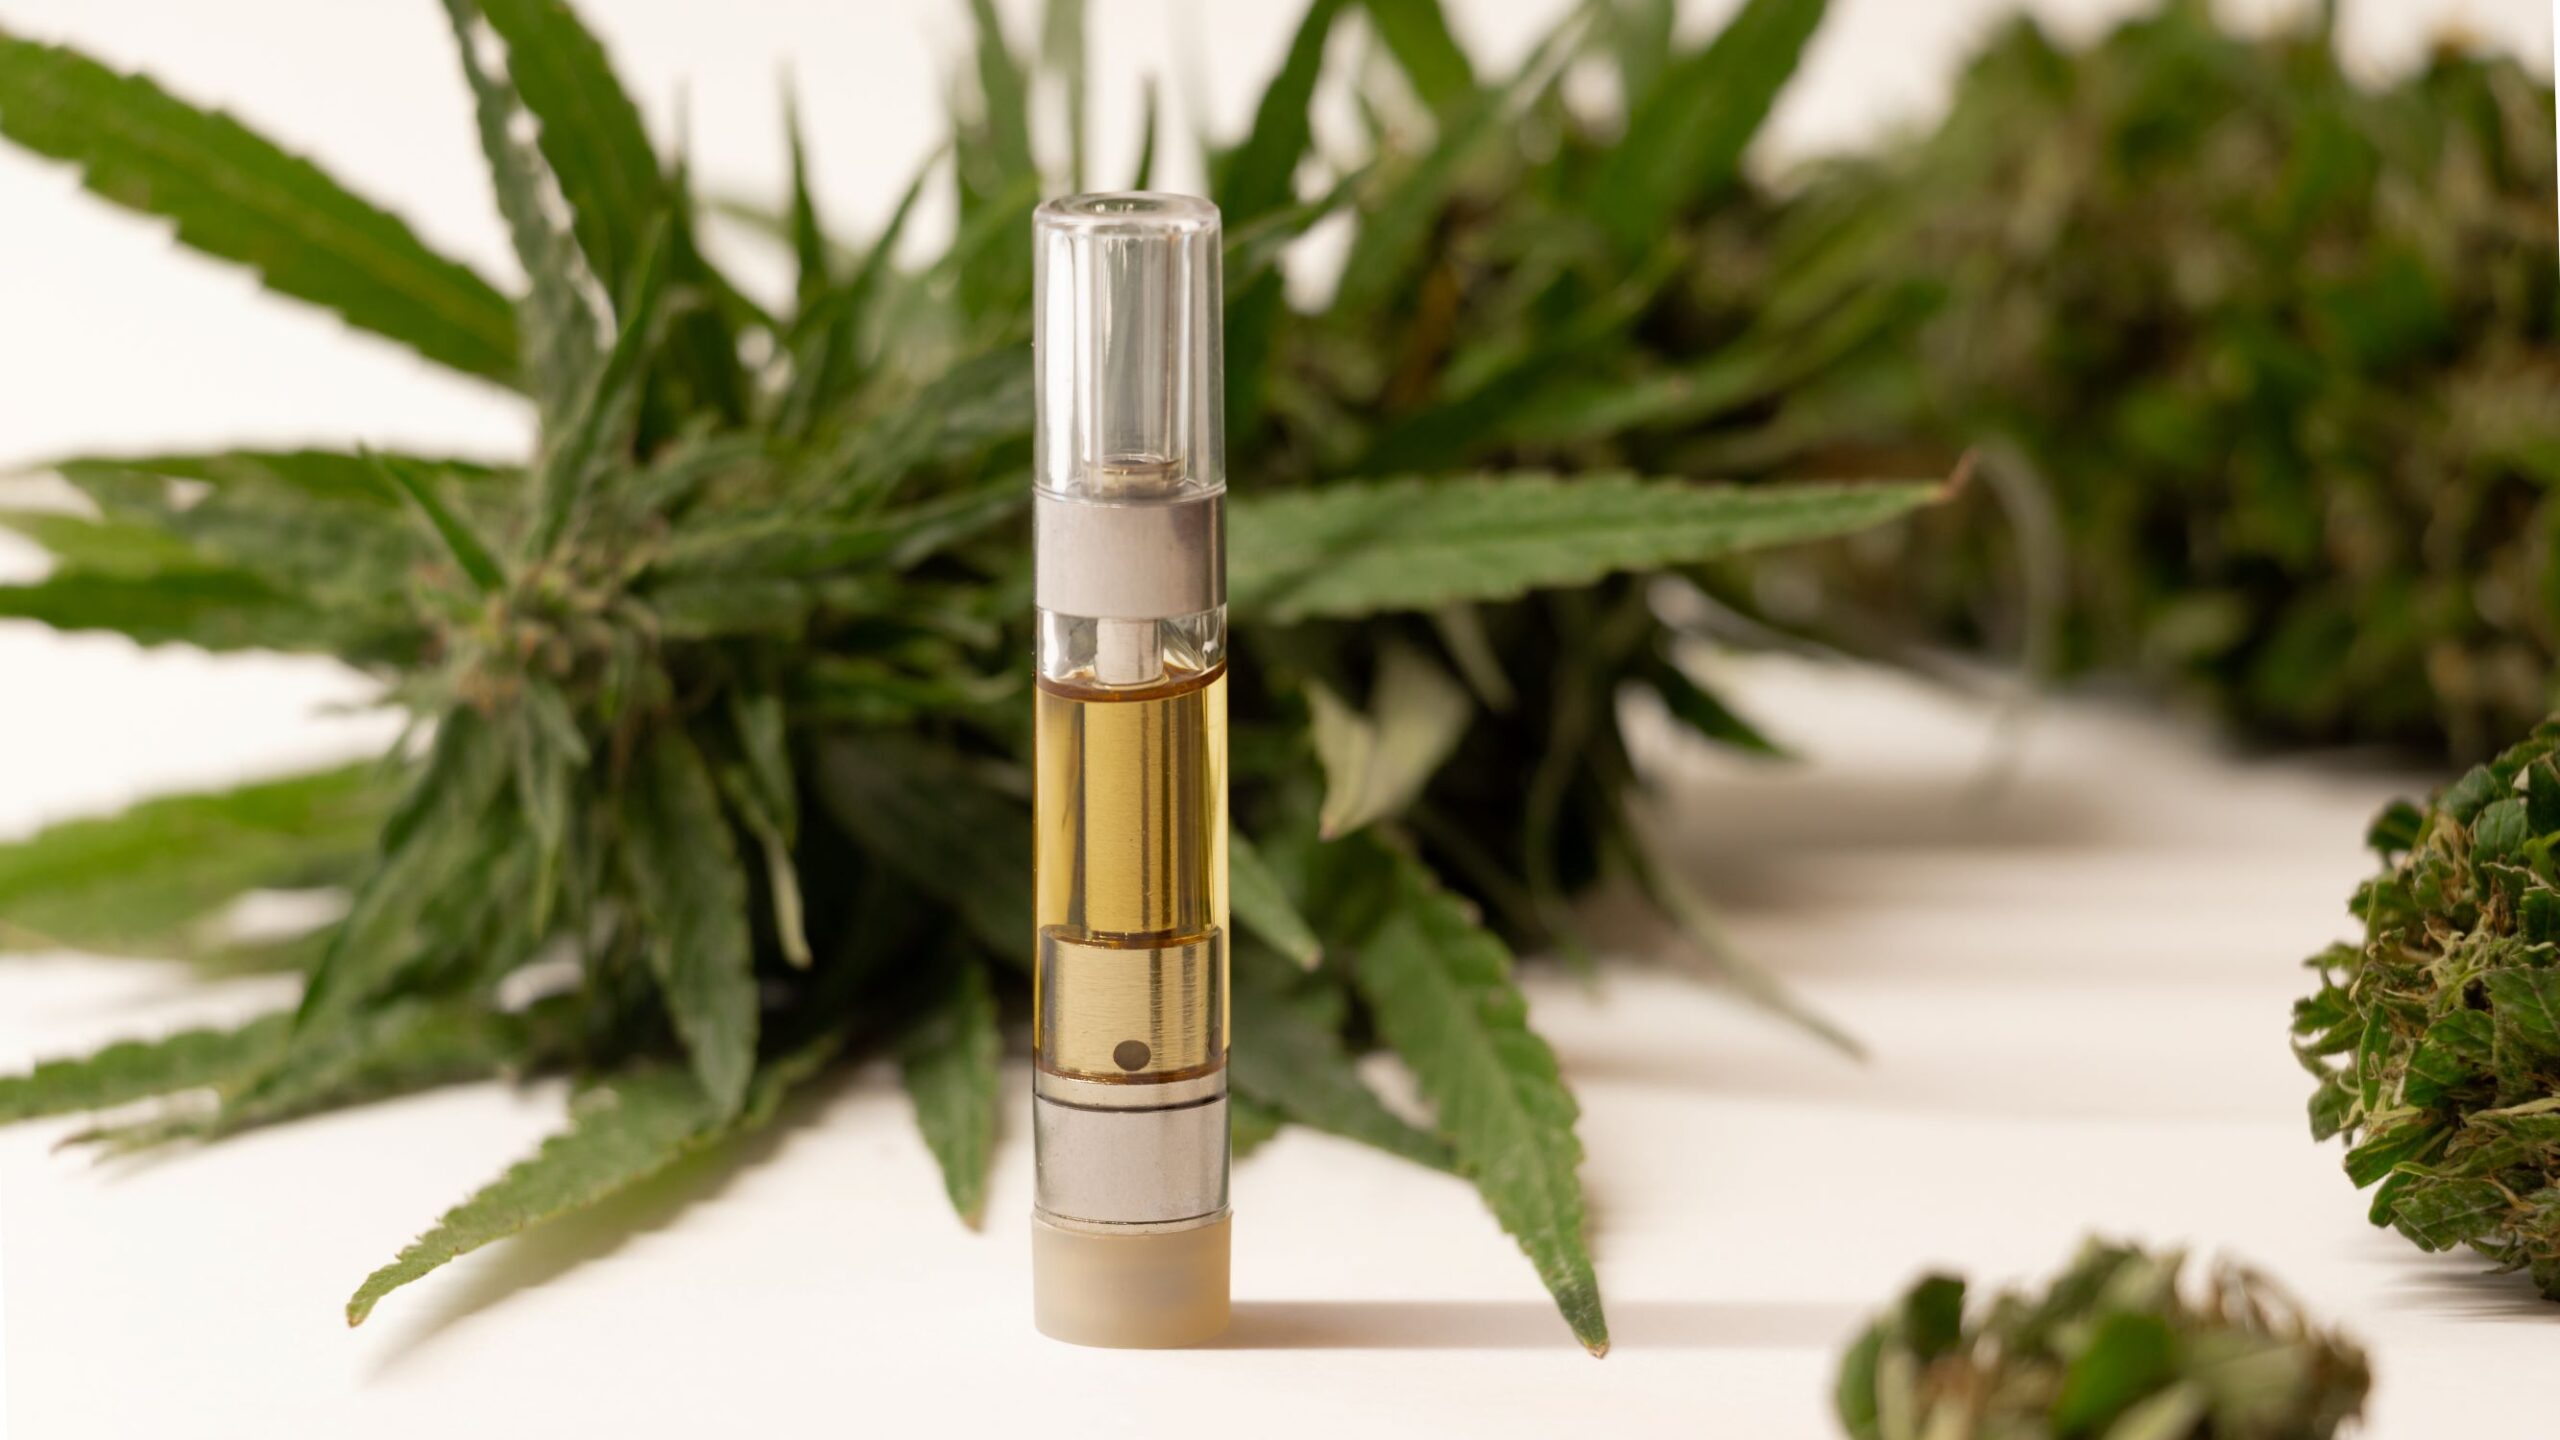 Benefits of CBD – What It Is, Why Some Swear By It